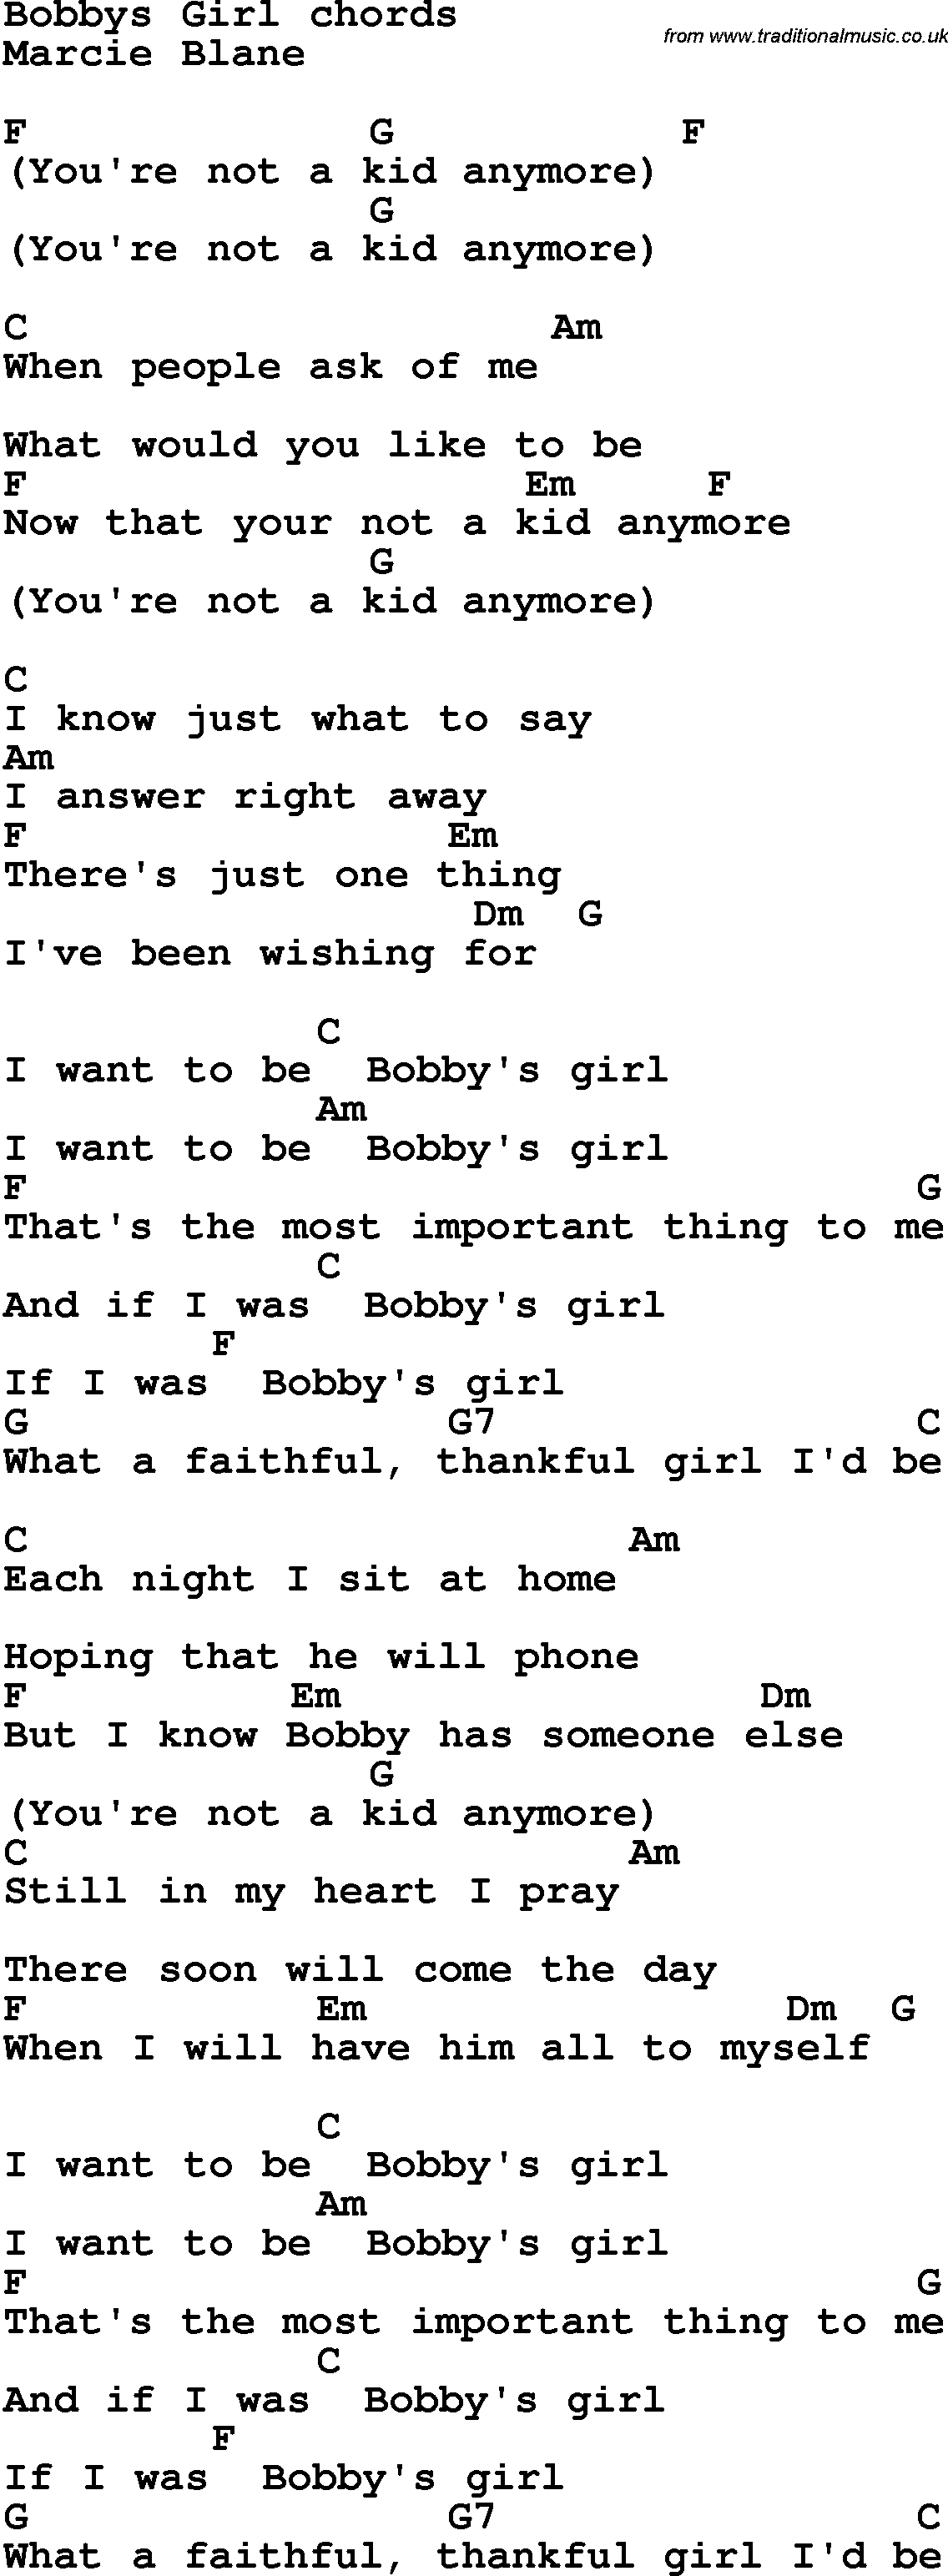 Song Lyrics with guitar chords for Bobby's Girl